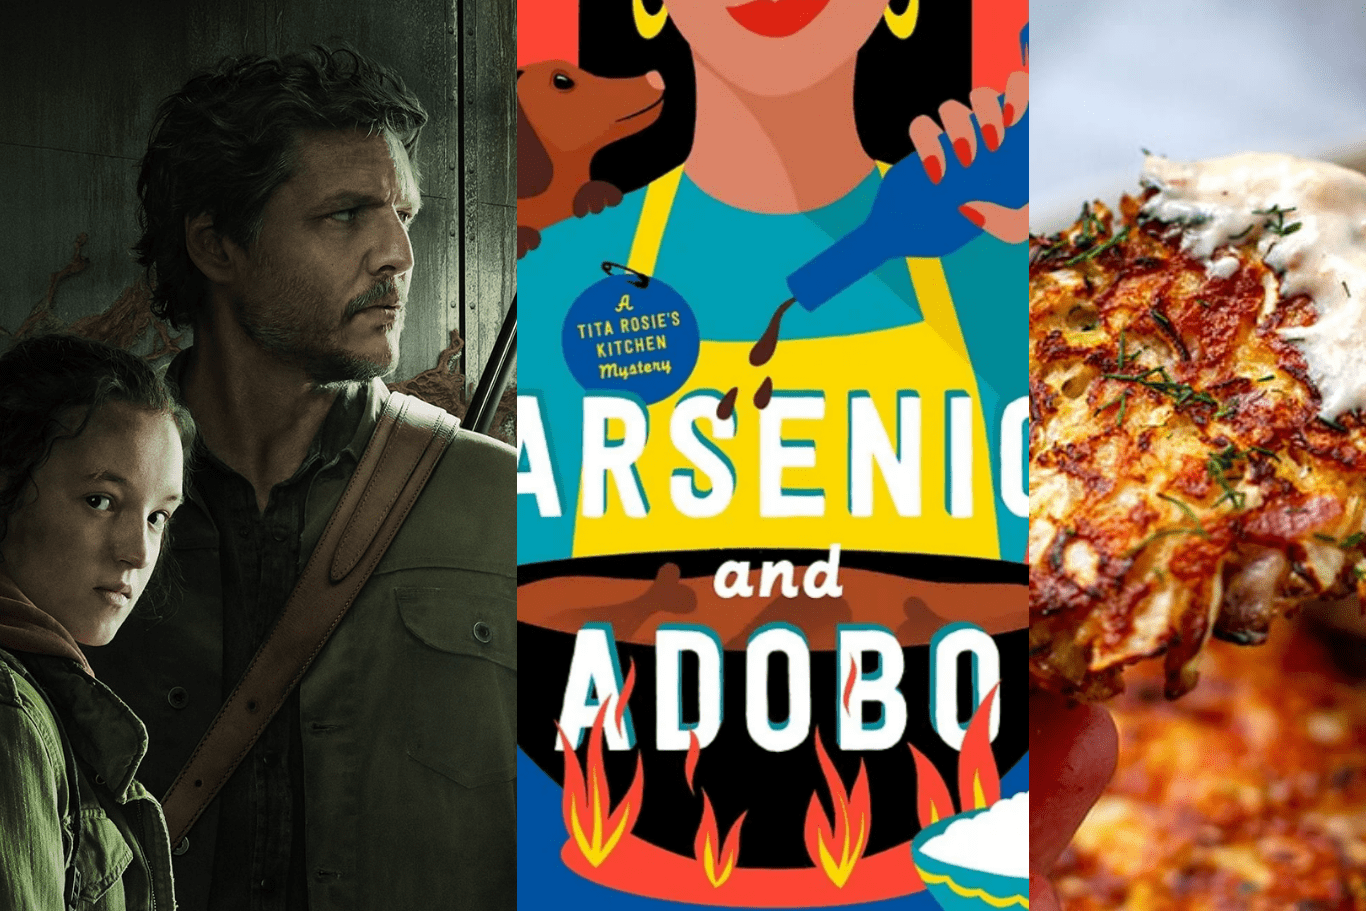 Food, series, a book, etc: Our team’s recommendations for the week